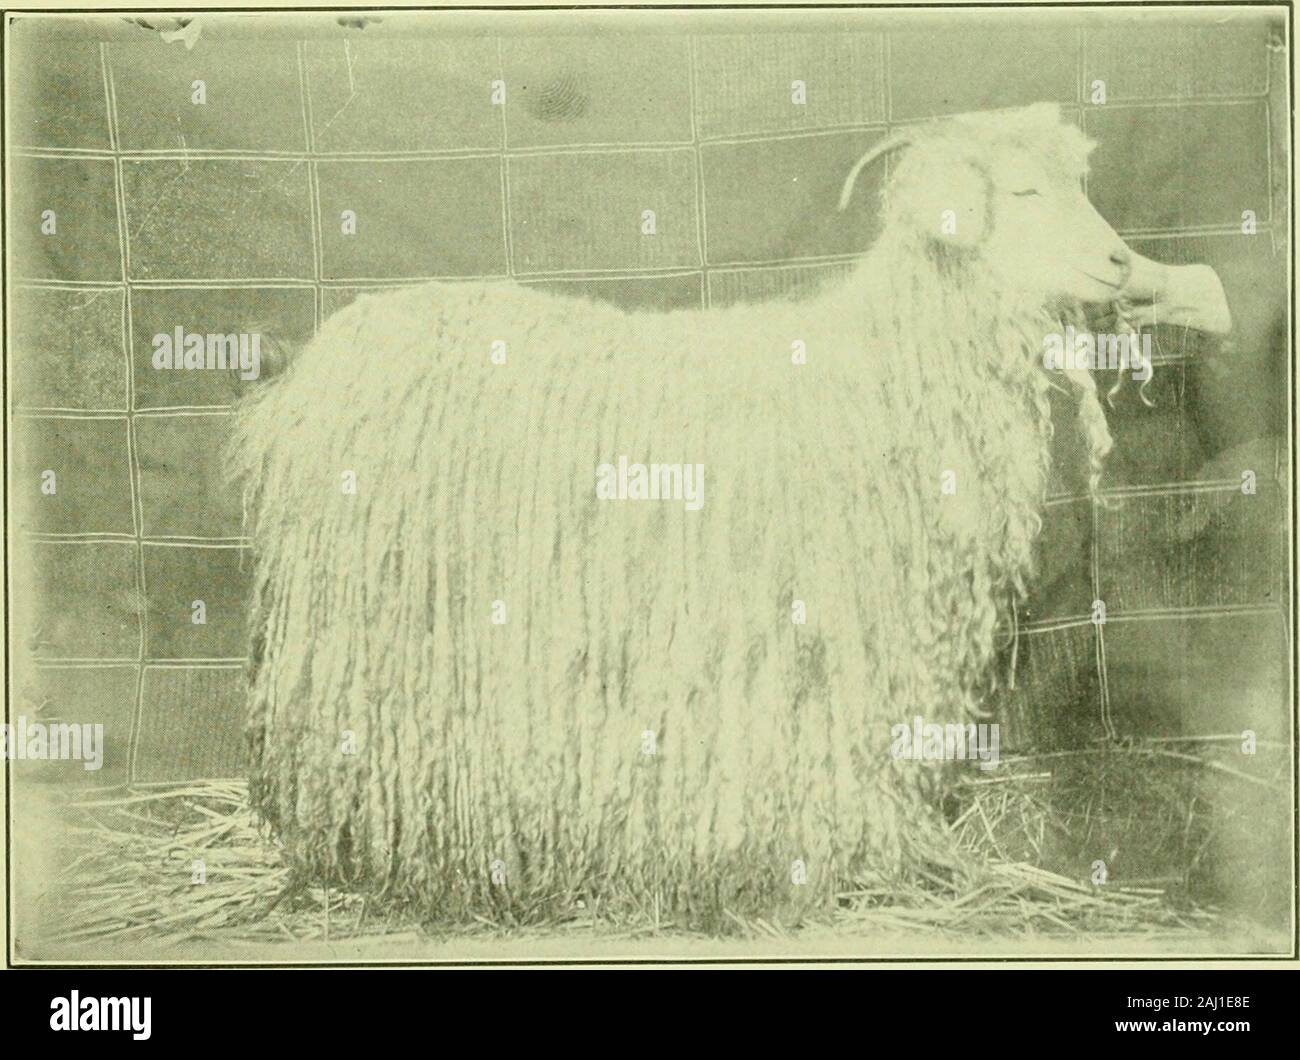 The angora and mohair industry in the Northwest; also a full report and proceedings of the Northwest Angora Goat Association held in Portland, Oregon, January 4-7, 1911 . James RiddellsTheir start in the Aneora business was in a part of the Shaw flock originally imported toOregon by Colonel Landrum. They con-tinued to use bucks of the Landrum strain inthis flock till the year 1902, when they gotpossession of the Harris tlock of pure bredTurkish Angoras, and began to use bucks fromthe latter flock on their original flock. The bucks from the Harris flock made abig improvement in the kids and wer Stock Photo